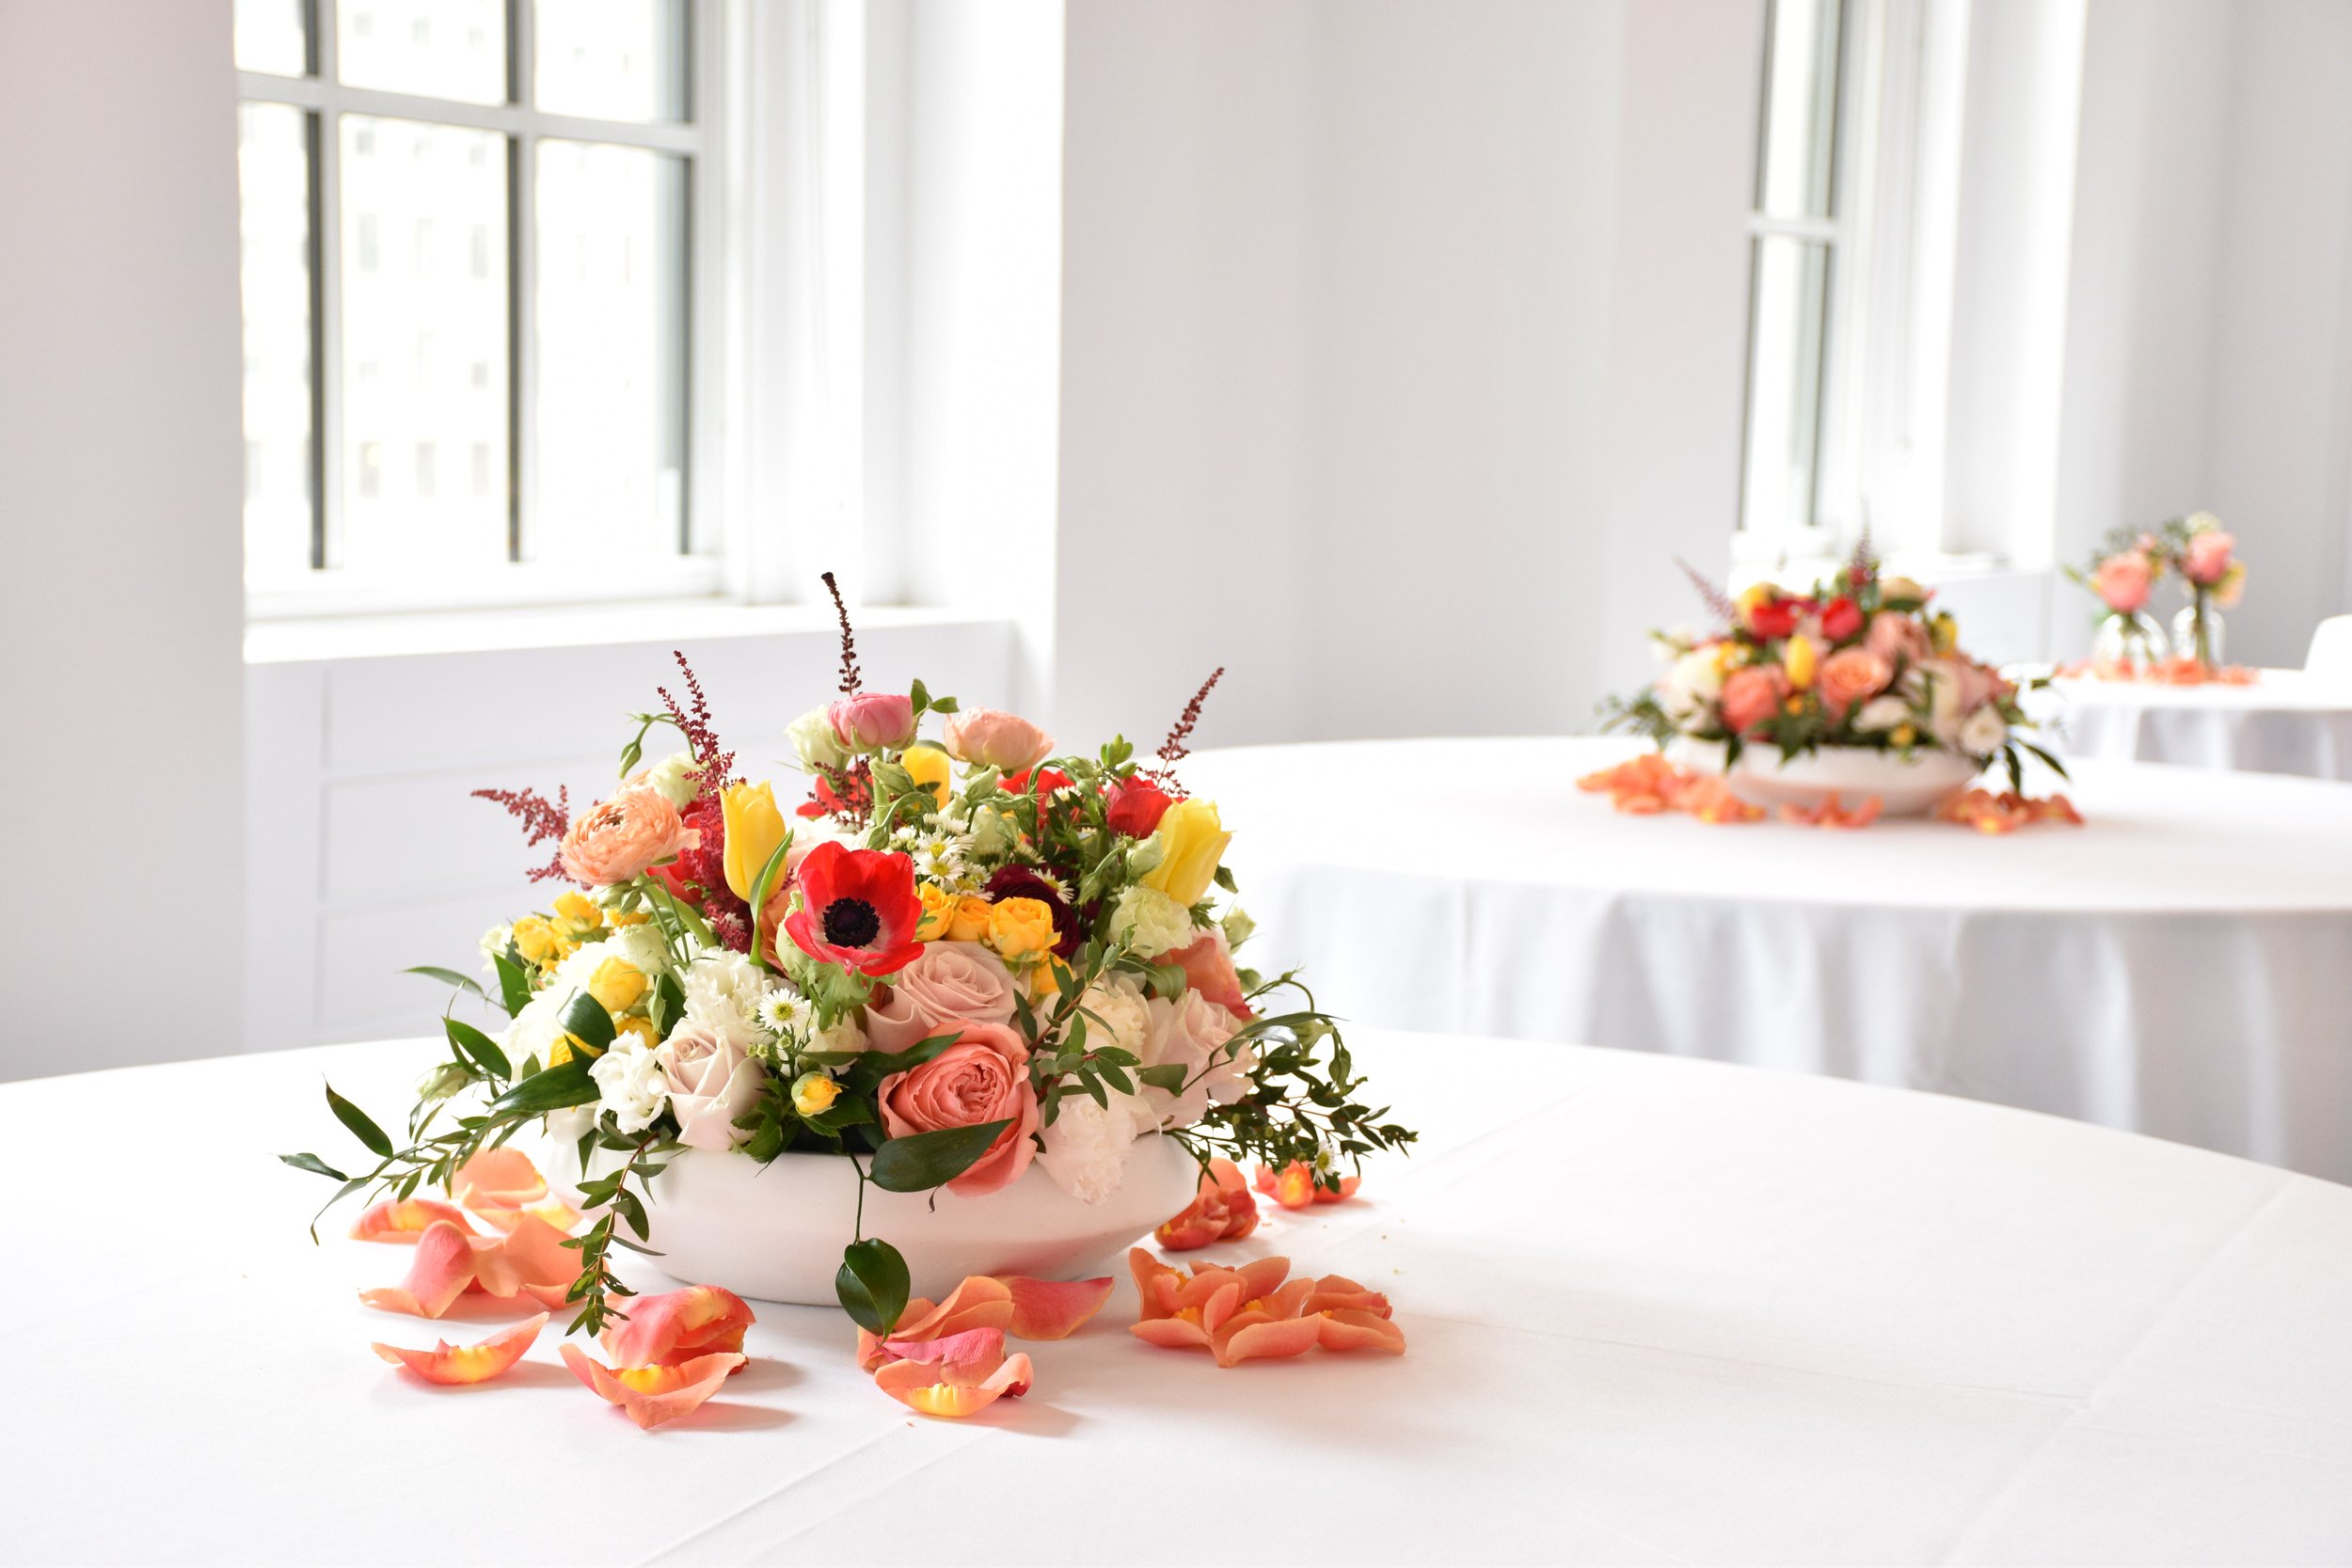 Centerpieces and Small Vases